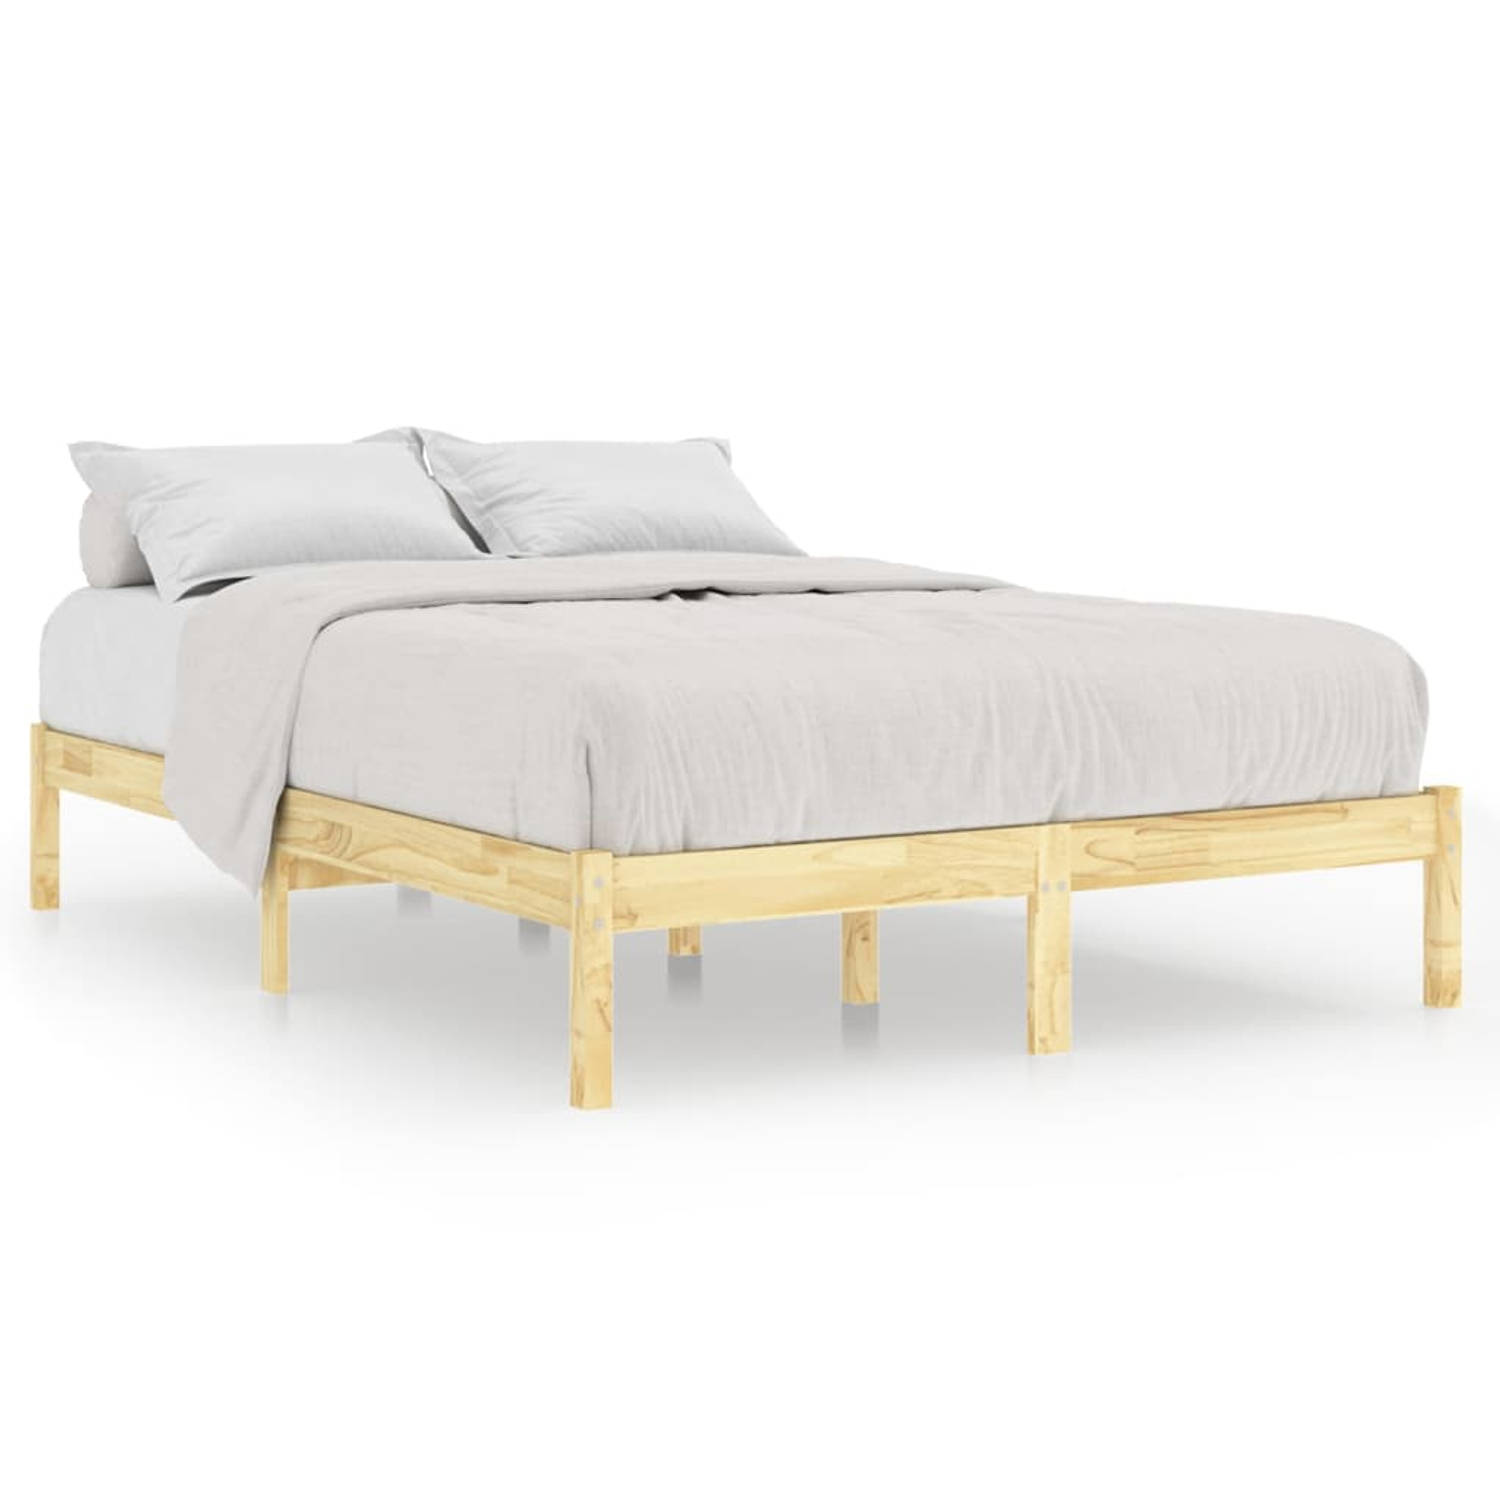 The Living Store Bedframe massief grenenhout 200x200 cm - Bed